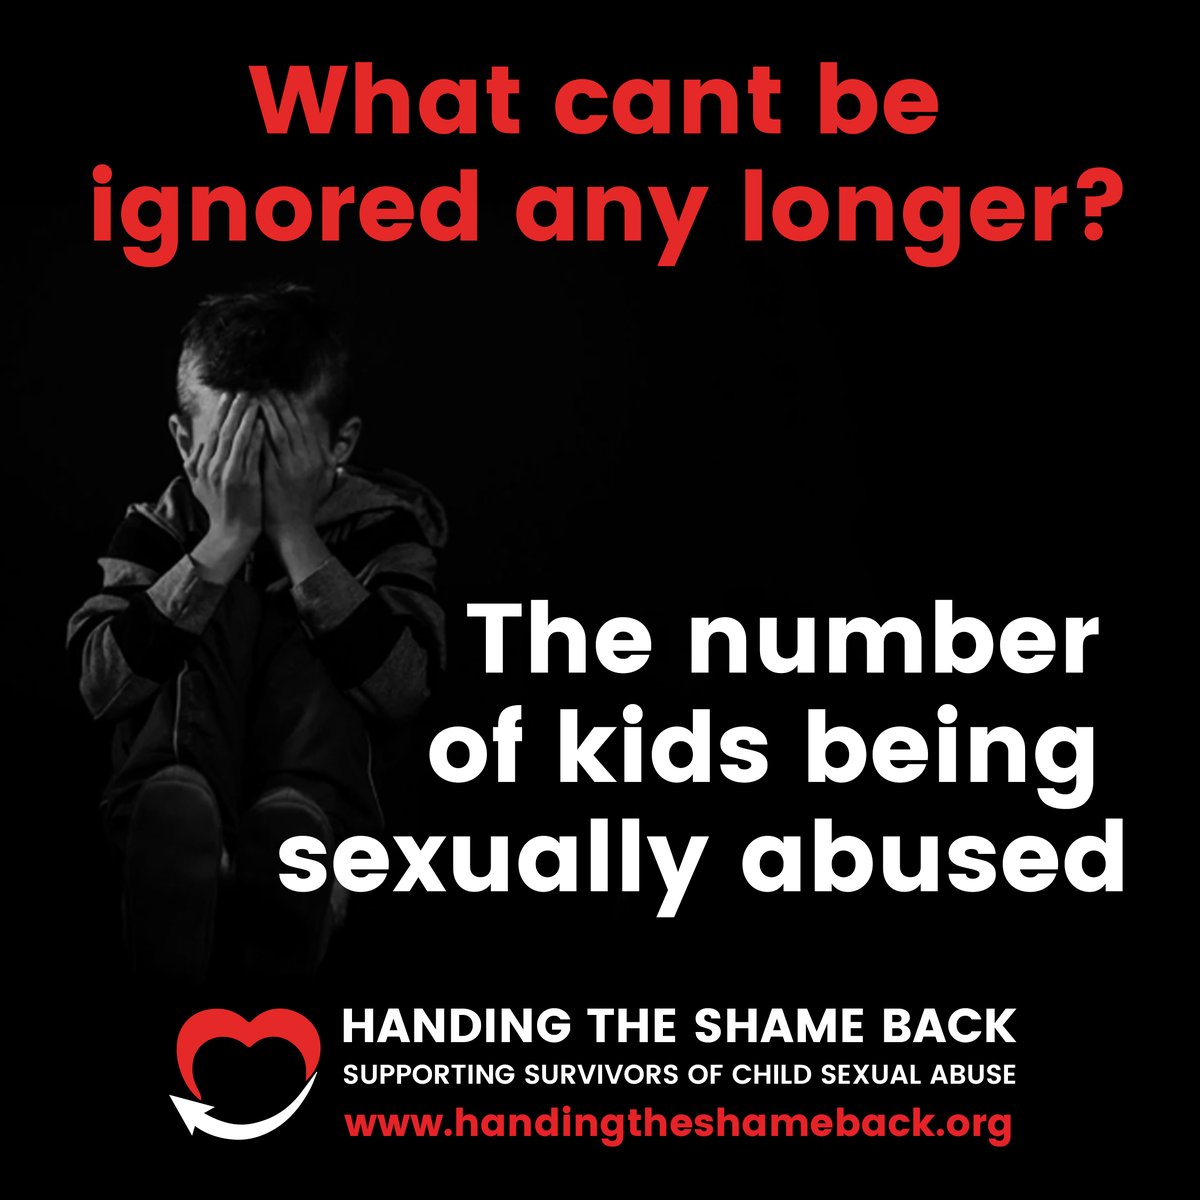 Uncomfortable or not
Stand with us to help protect our children by starting a conversation around this. Come on loving parents and safe adults everywhere, Lets Save Some Kids. 
For more info go to handingtheshameback.org
#LetsSaveSomeKids
#handsign4kids
#handingtheshameback